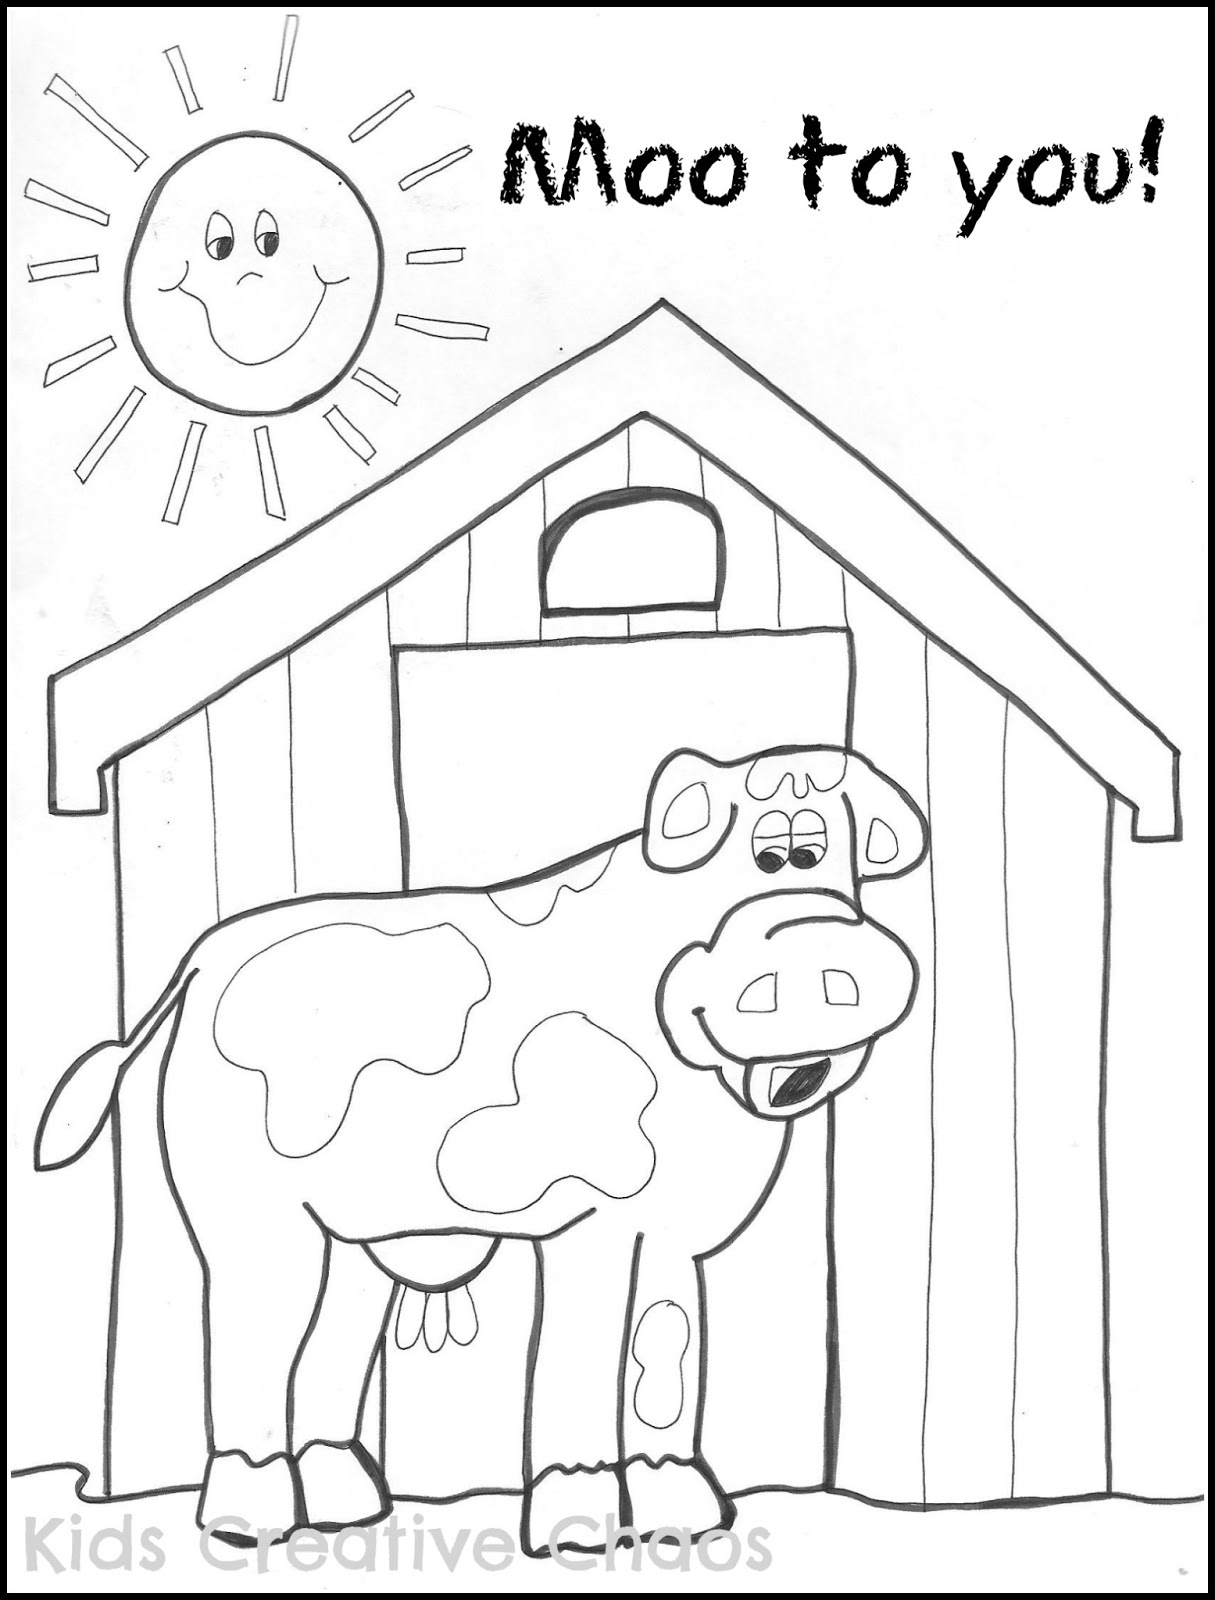 Download Big Red Barn Coloring Sheet and Creative Country Sayings ...